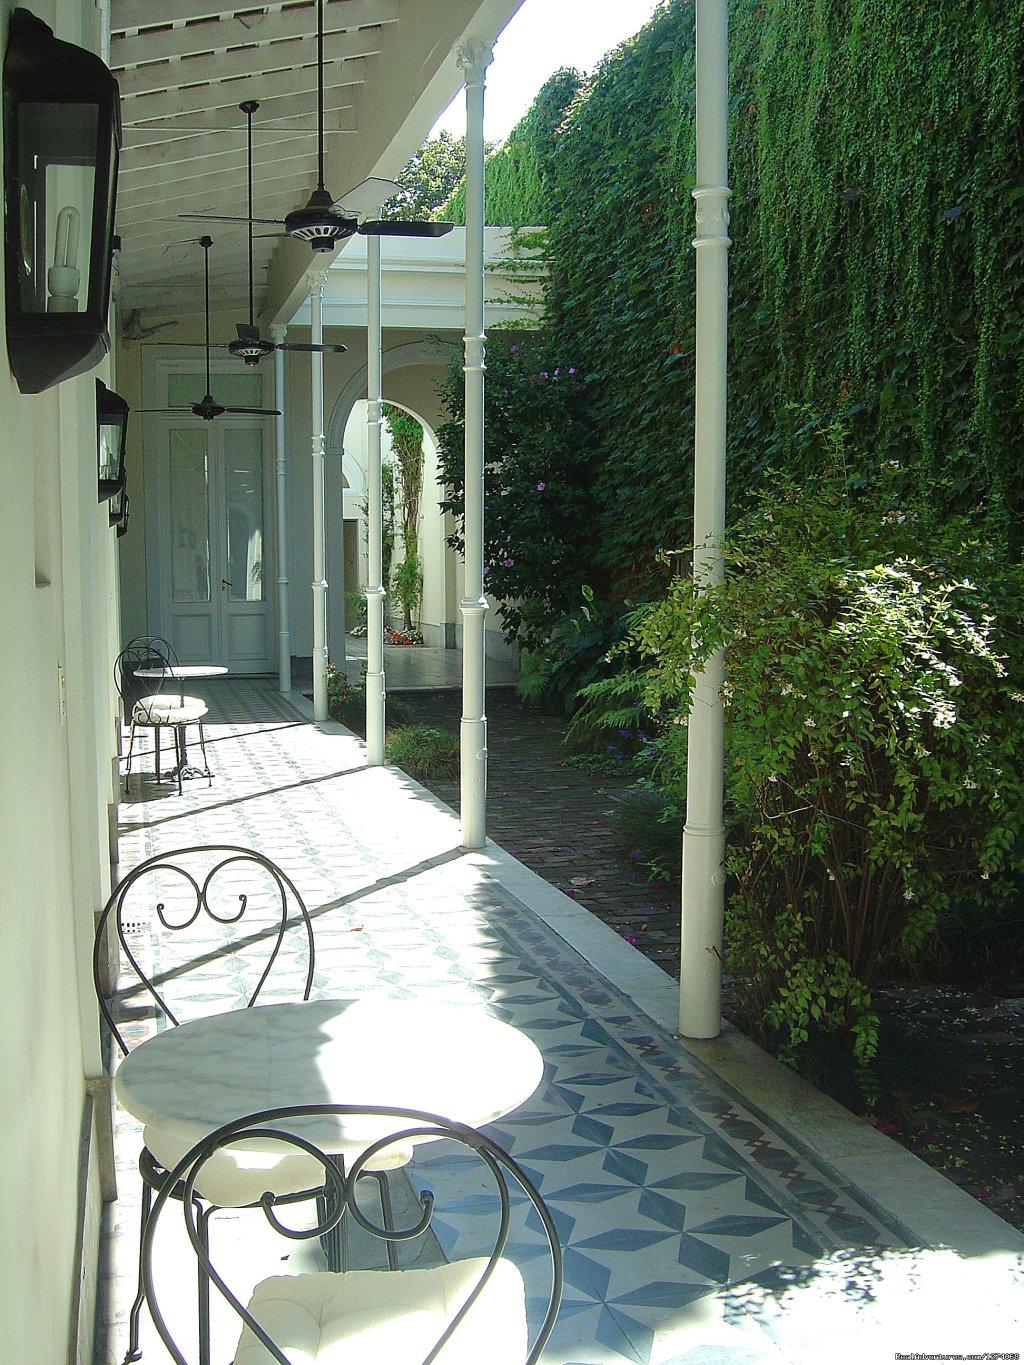 Great gallery of the beautiful garden | Charming Home Buenos Aires | Image #6/26 | 